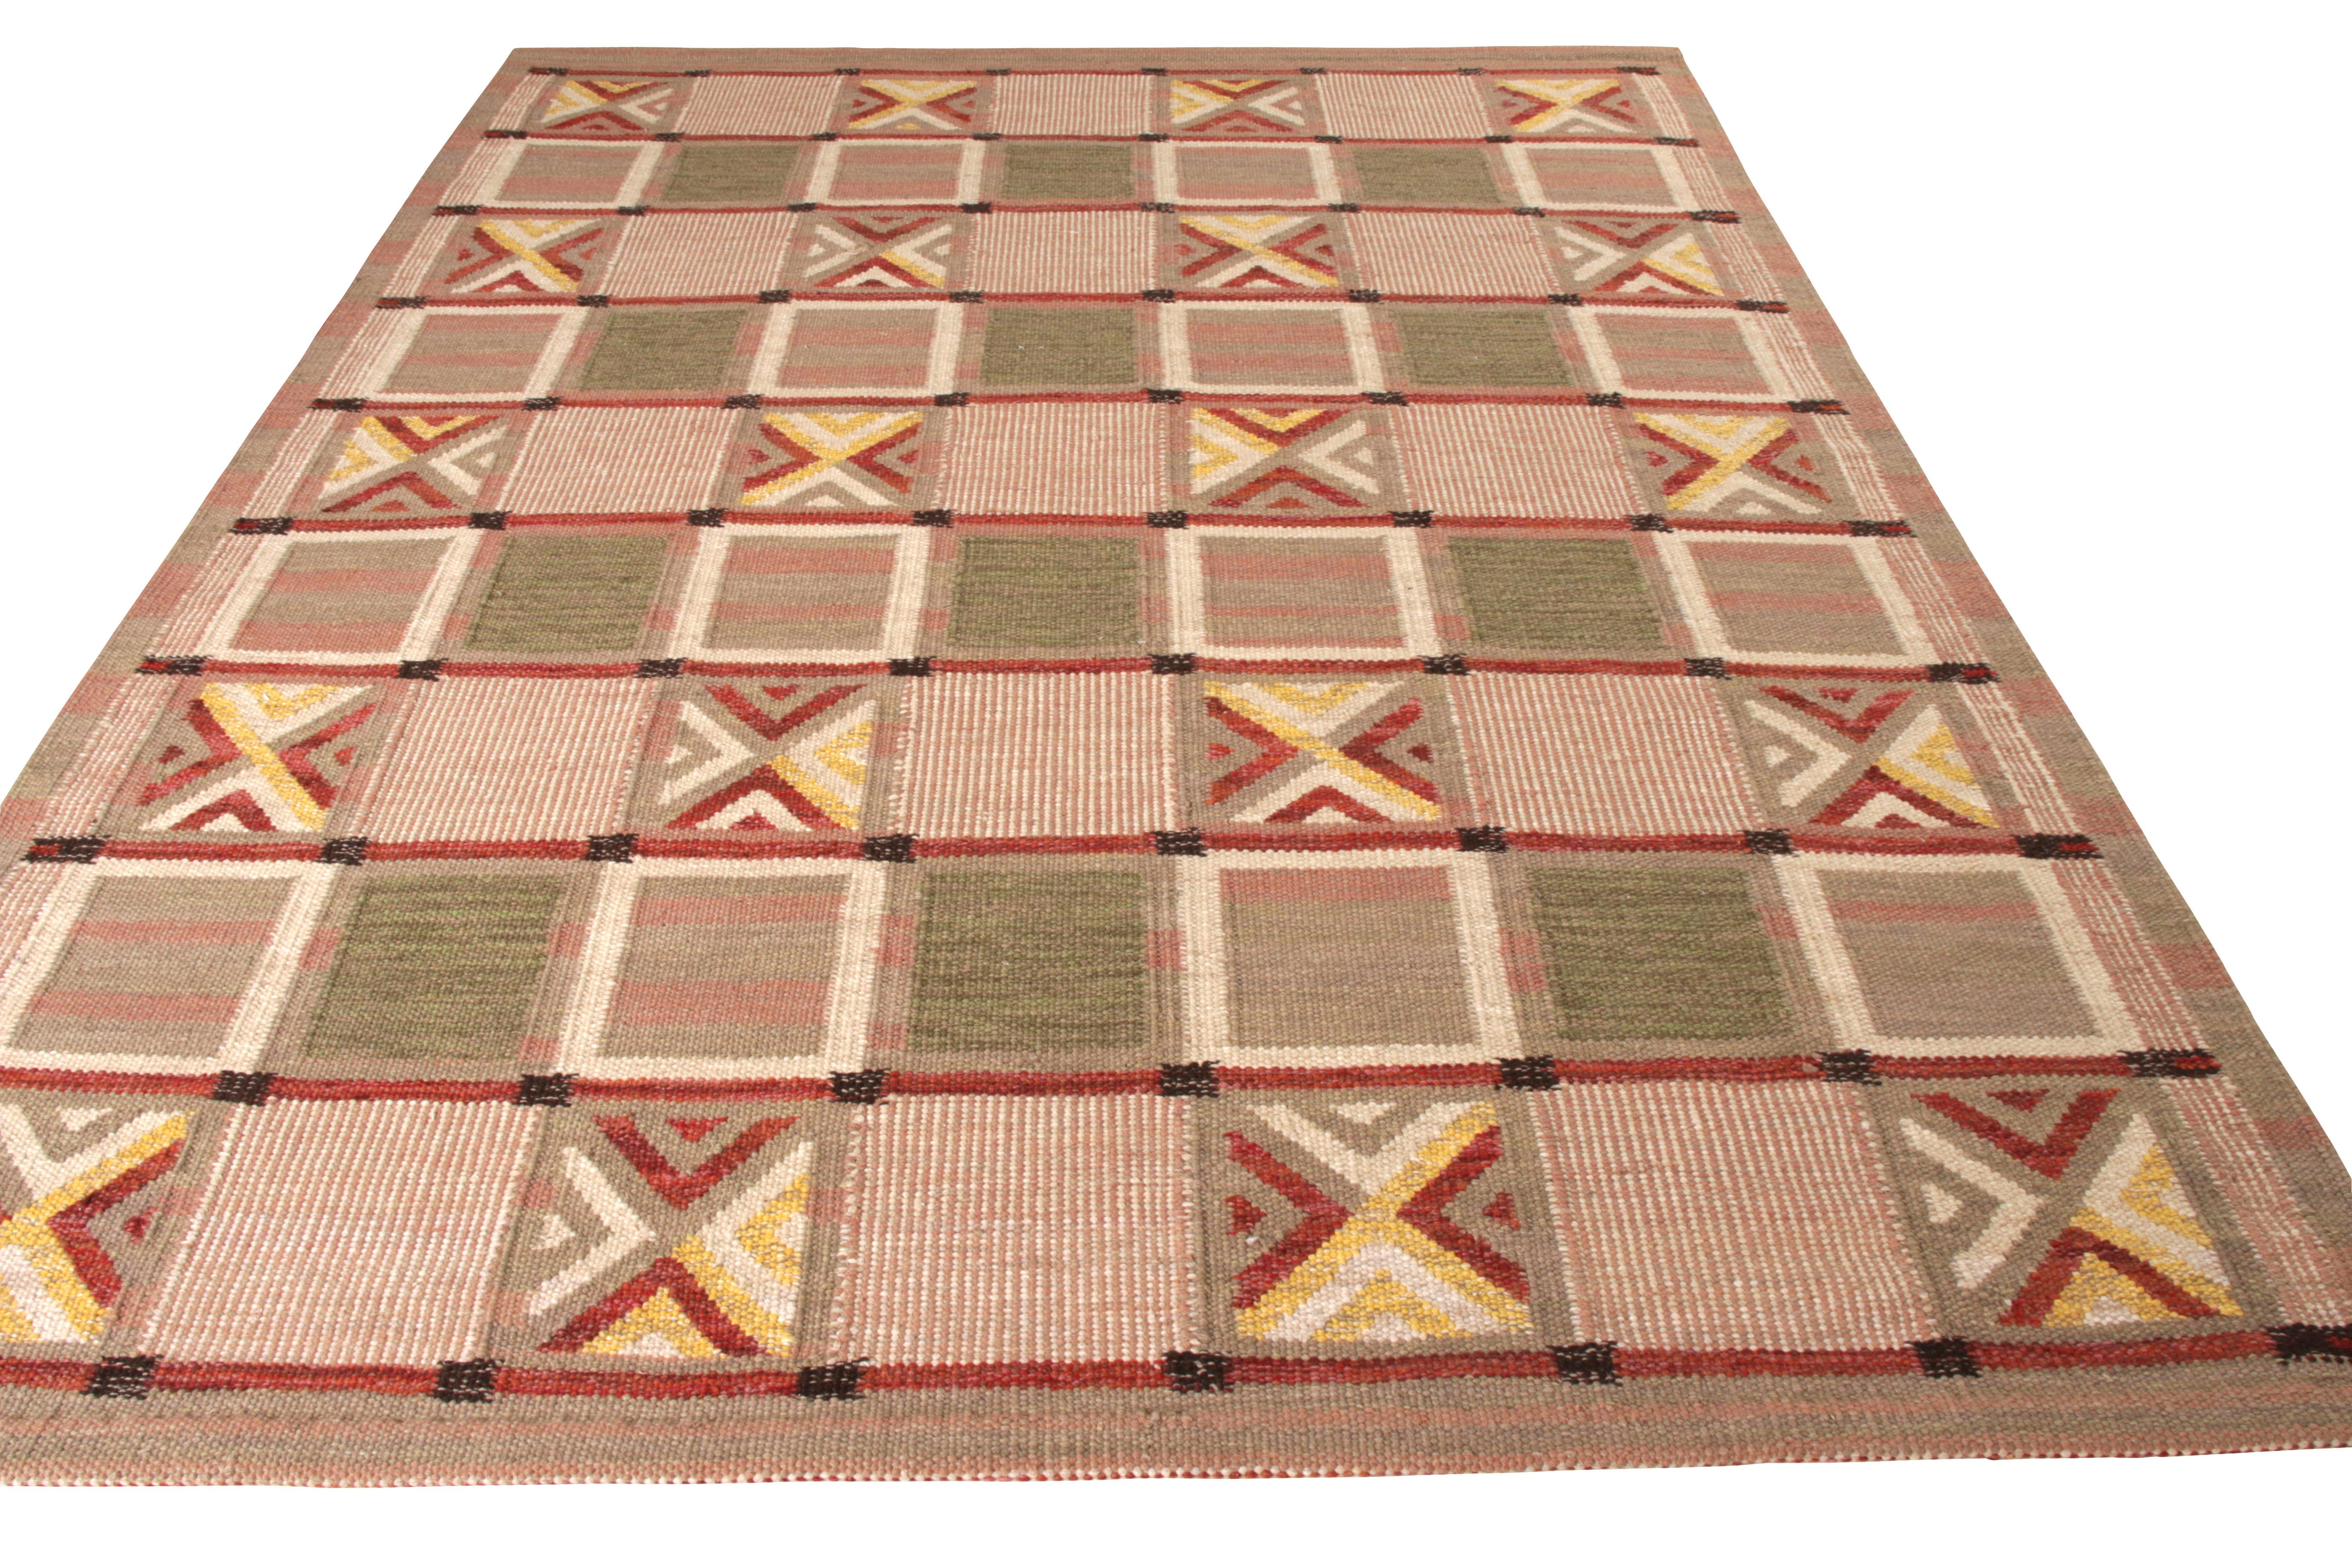 A coveted entrant to Rug & Kilim’s Scandinavian Collection, this 8x10 Kilim rug enjoys an audacious geometric pattern that lends a notable sense of movement in gracious scale. With soft beige tones playing in the pink background, the blend of darker